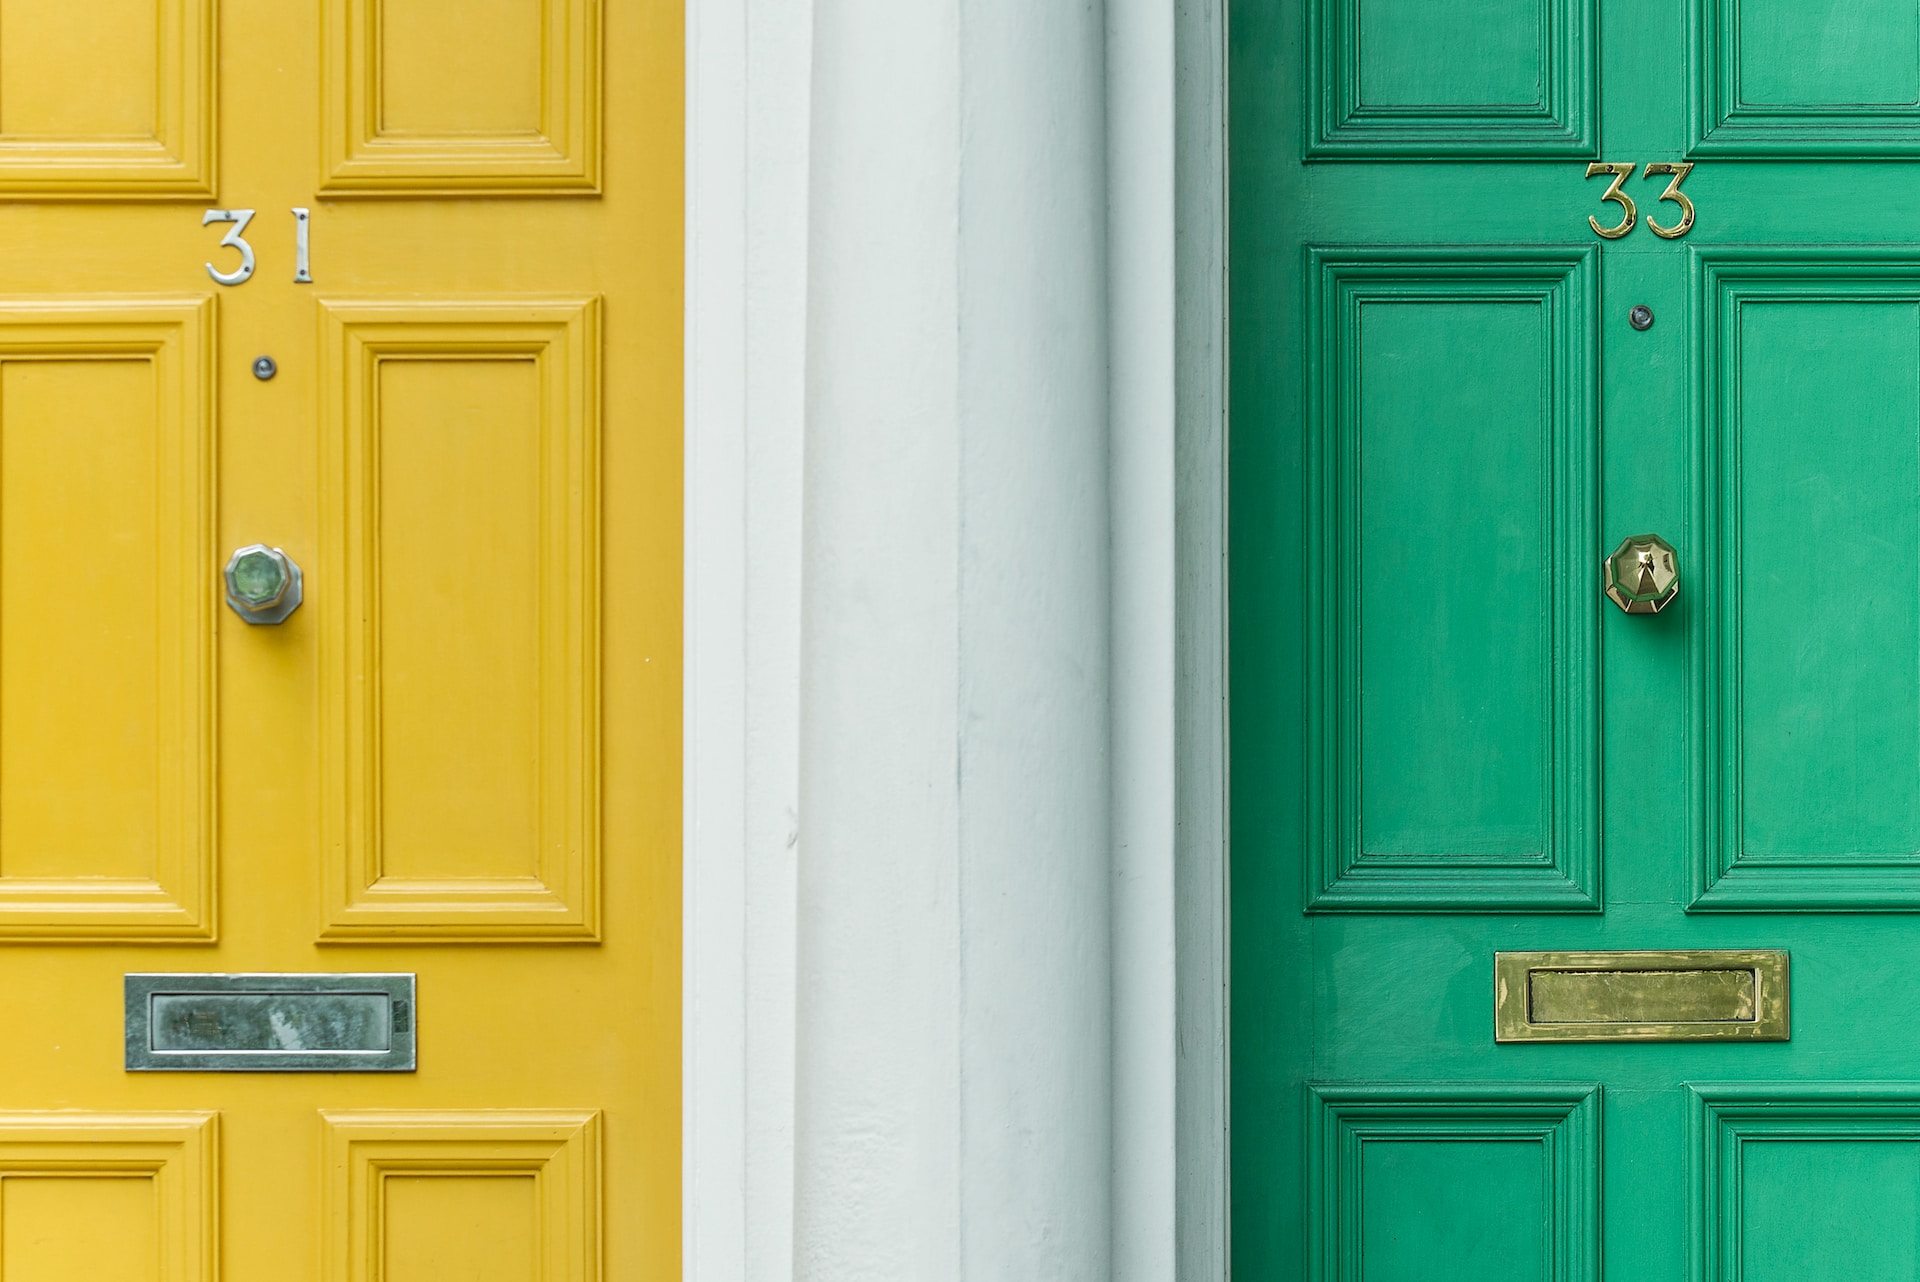 A yellow and green front door side by side